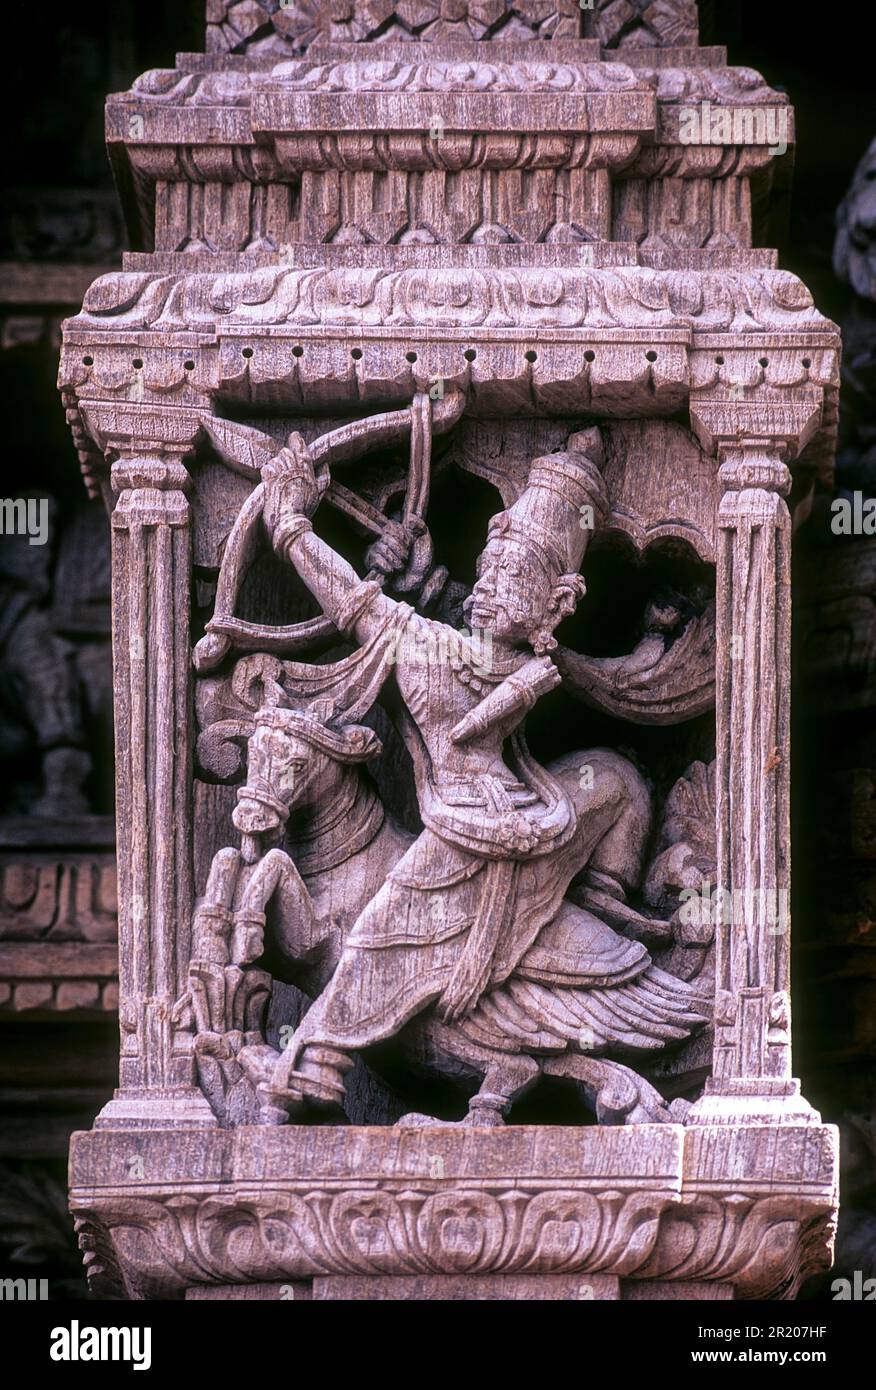 Revanta as a huntsman on a horse, with a bow and arrow, 17th century wooden carvings in Meenakshi-Sundareswarar temple Chariot at Madurai, Tamil Stock Photo